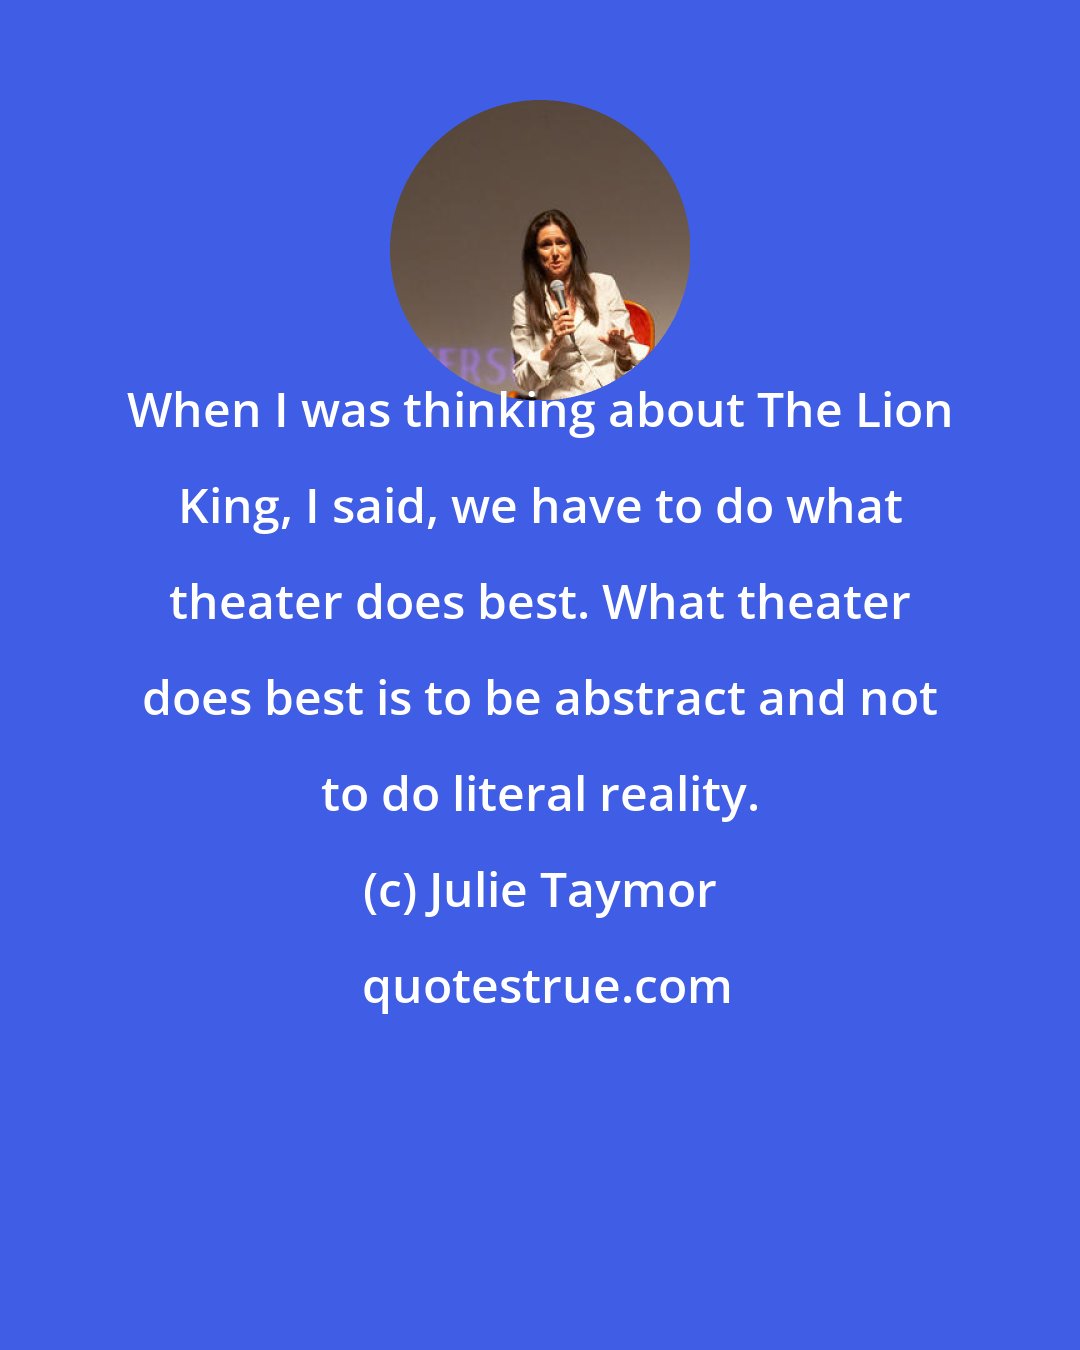 Julie Taymor: When I was thinking about The Lion King, I said, we have to do what theater does best. What theater does best is to be abstract and not to do literal reality.